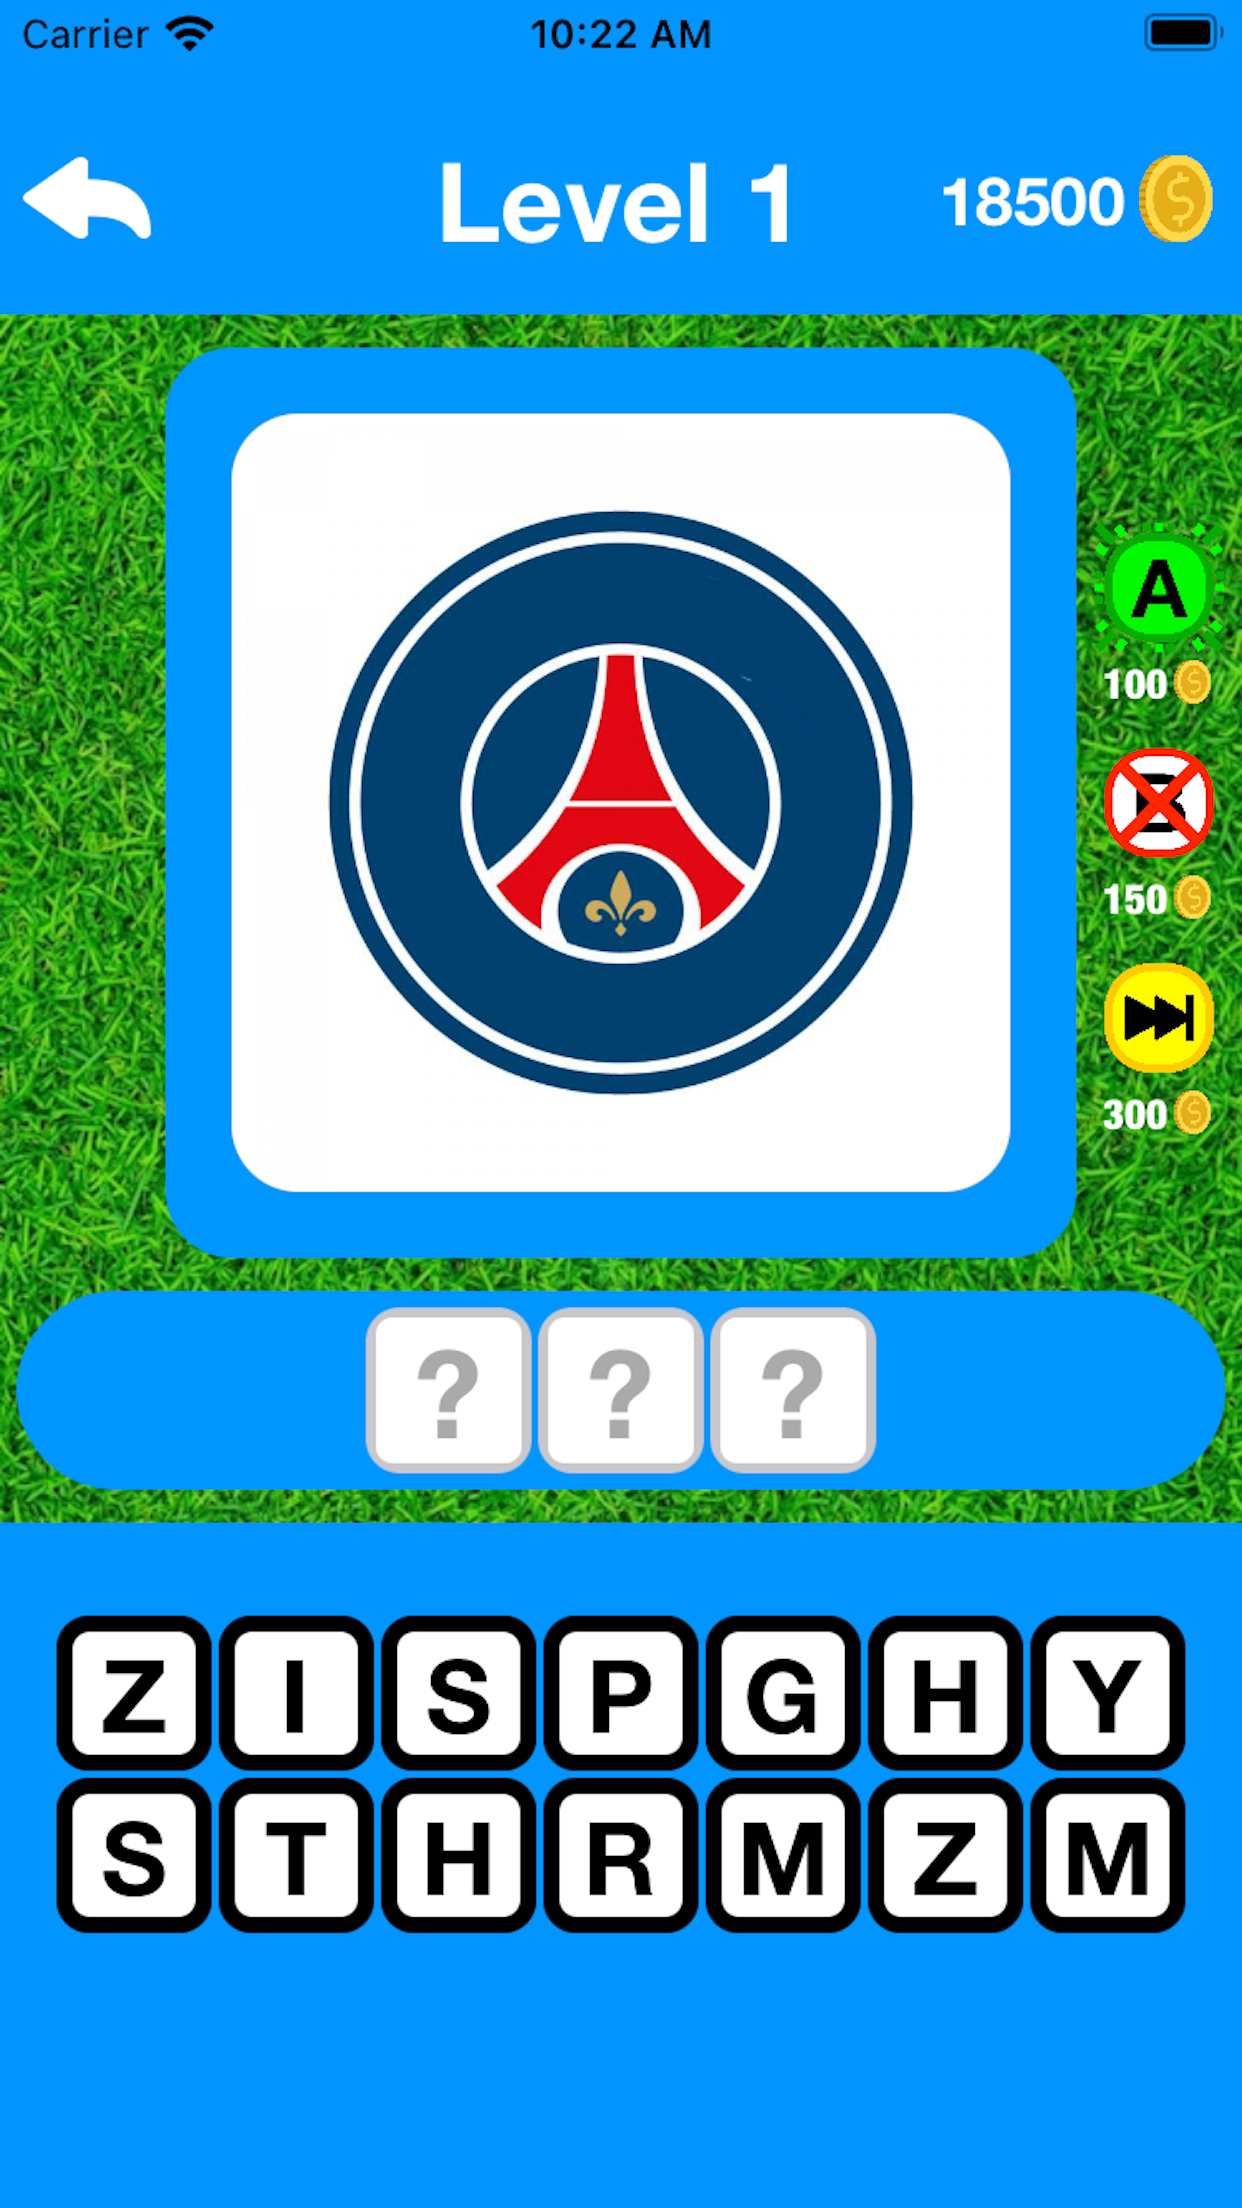 Football Logo Quiz::Appstore for Android